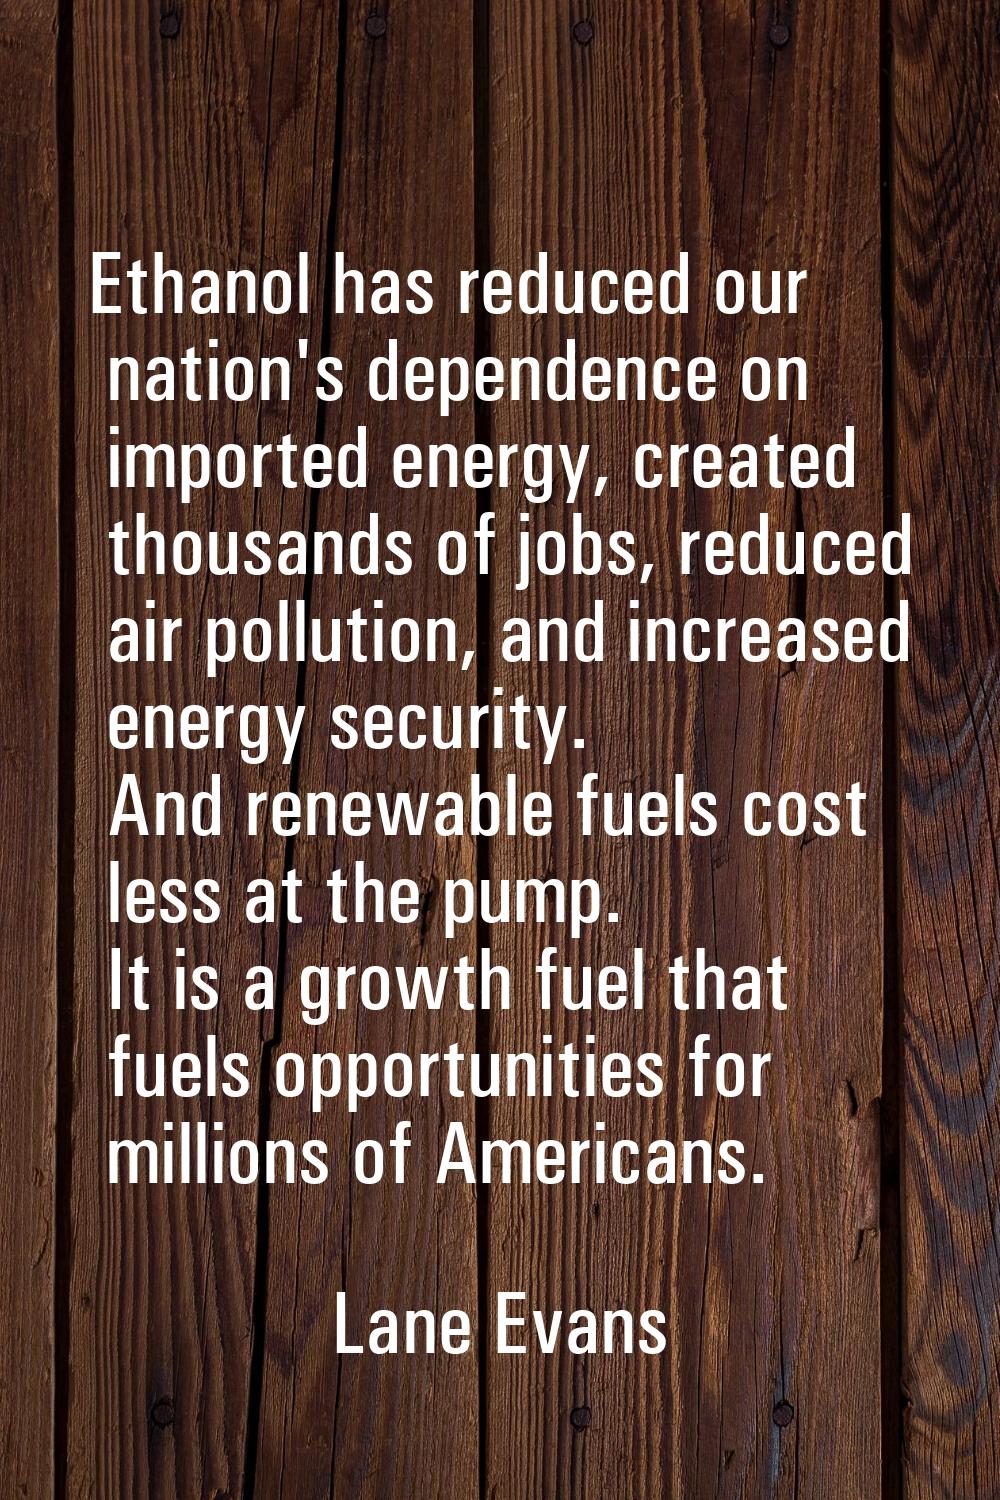 Ethanol has reduced our nation's dependence on imported energy, created thousands of jobs, reduced 